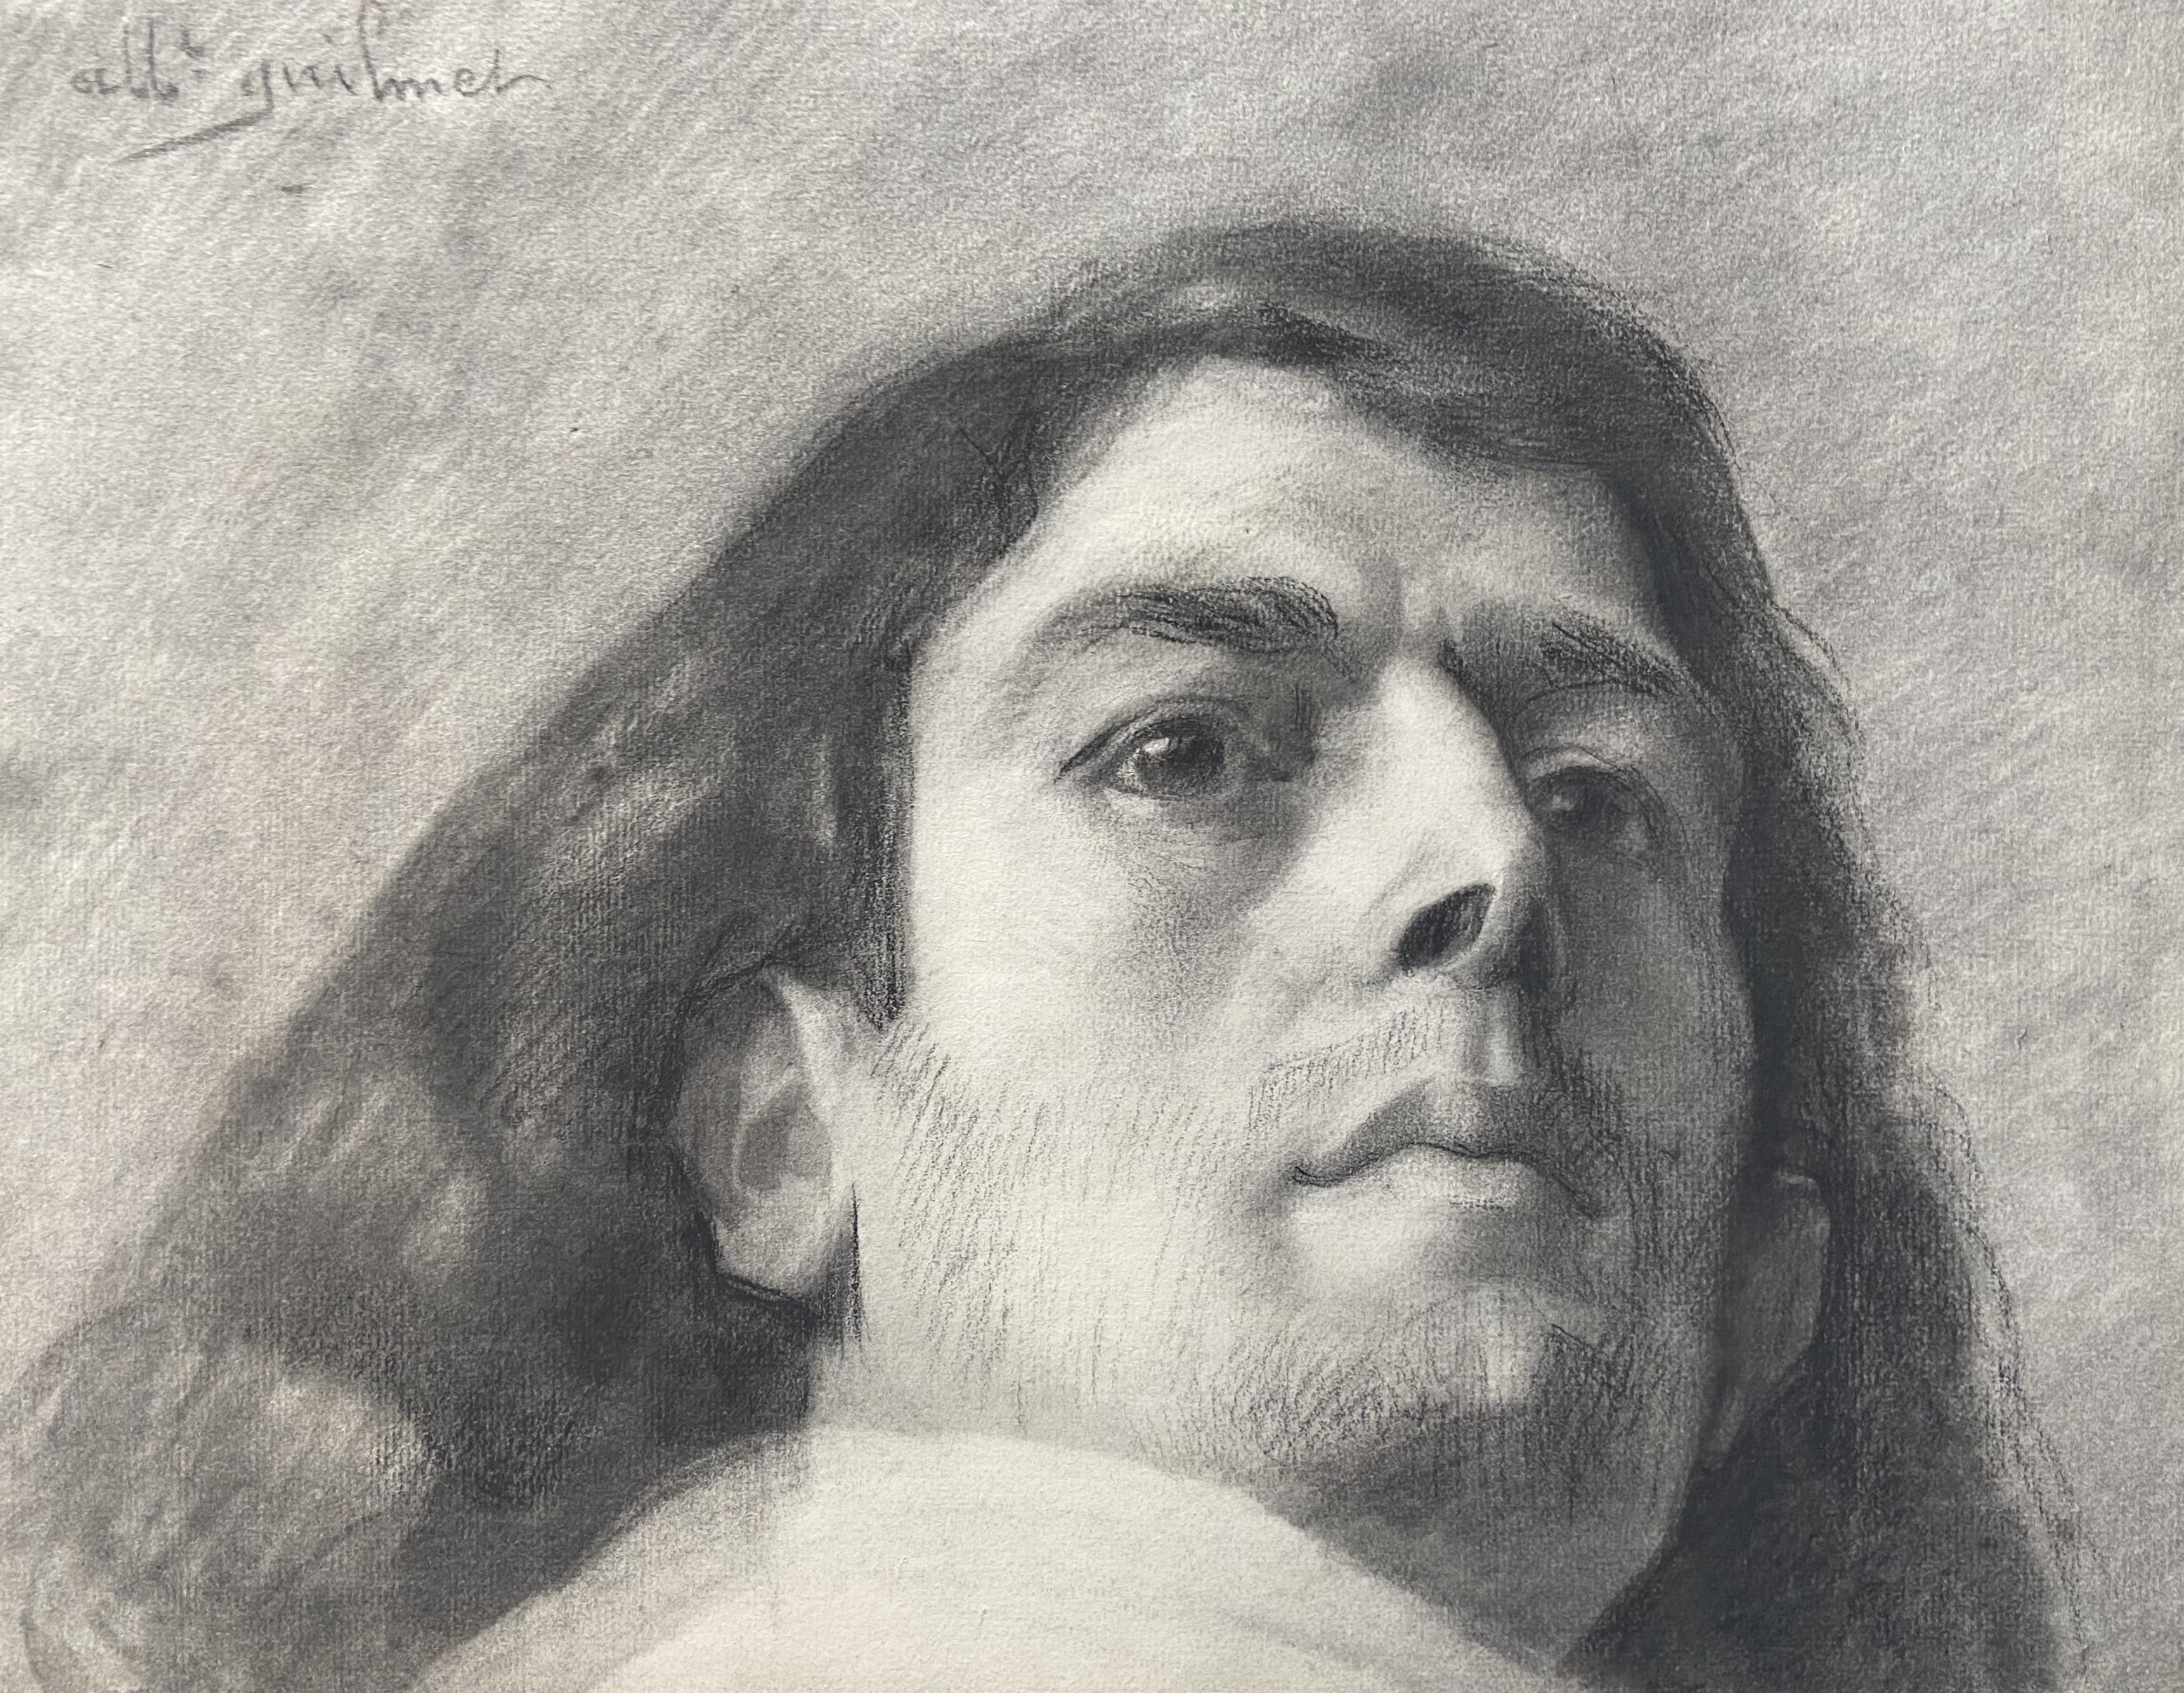 Albert Paul Guilmet (1879-1922) 
Portrait of a man, 
signed upper left
charcoal on paper
26.5 x 33,8 cm
Framed : 43.5 x 52 cm

Little is known about Abert Paul Guilmet, apart from the fact that he took part in the Salon and was a pupil of Henri